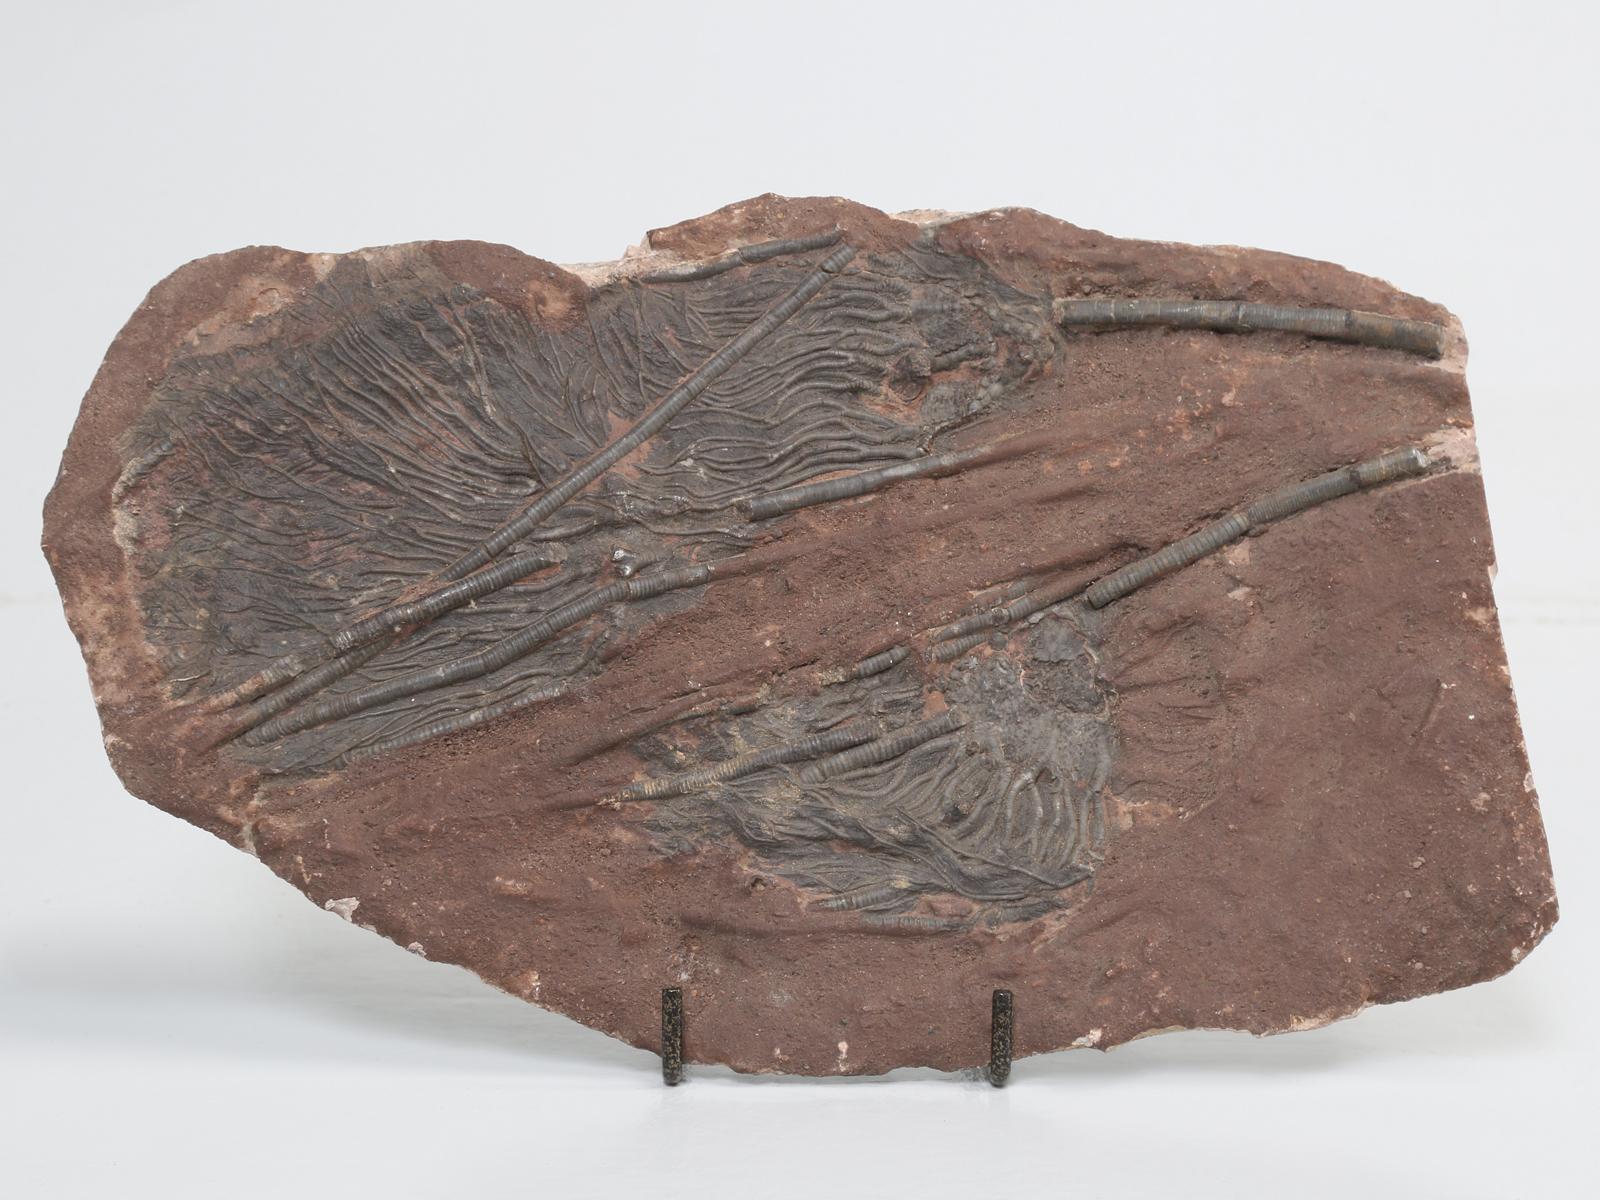 Moroccan fossil named Crinoid, which are about 450 million years old. Crinoid fossils, or sea lilies are members of the Echinodermata phylum. Our Crinoid fossil plate was dug up in Morocco. These fossils have the appearance of graceful flowers, that